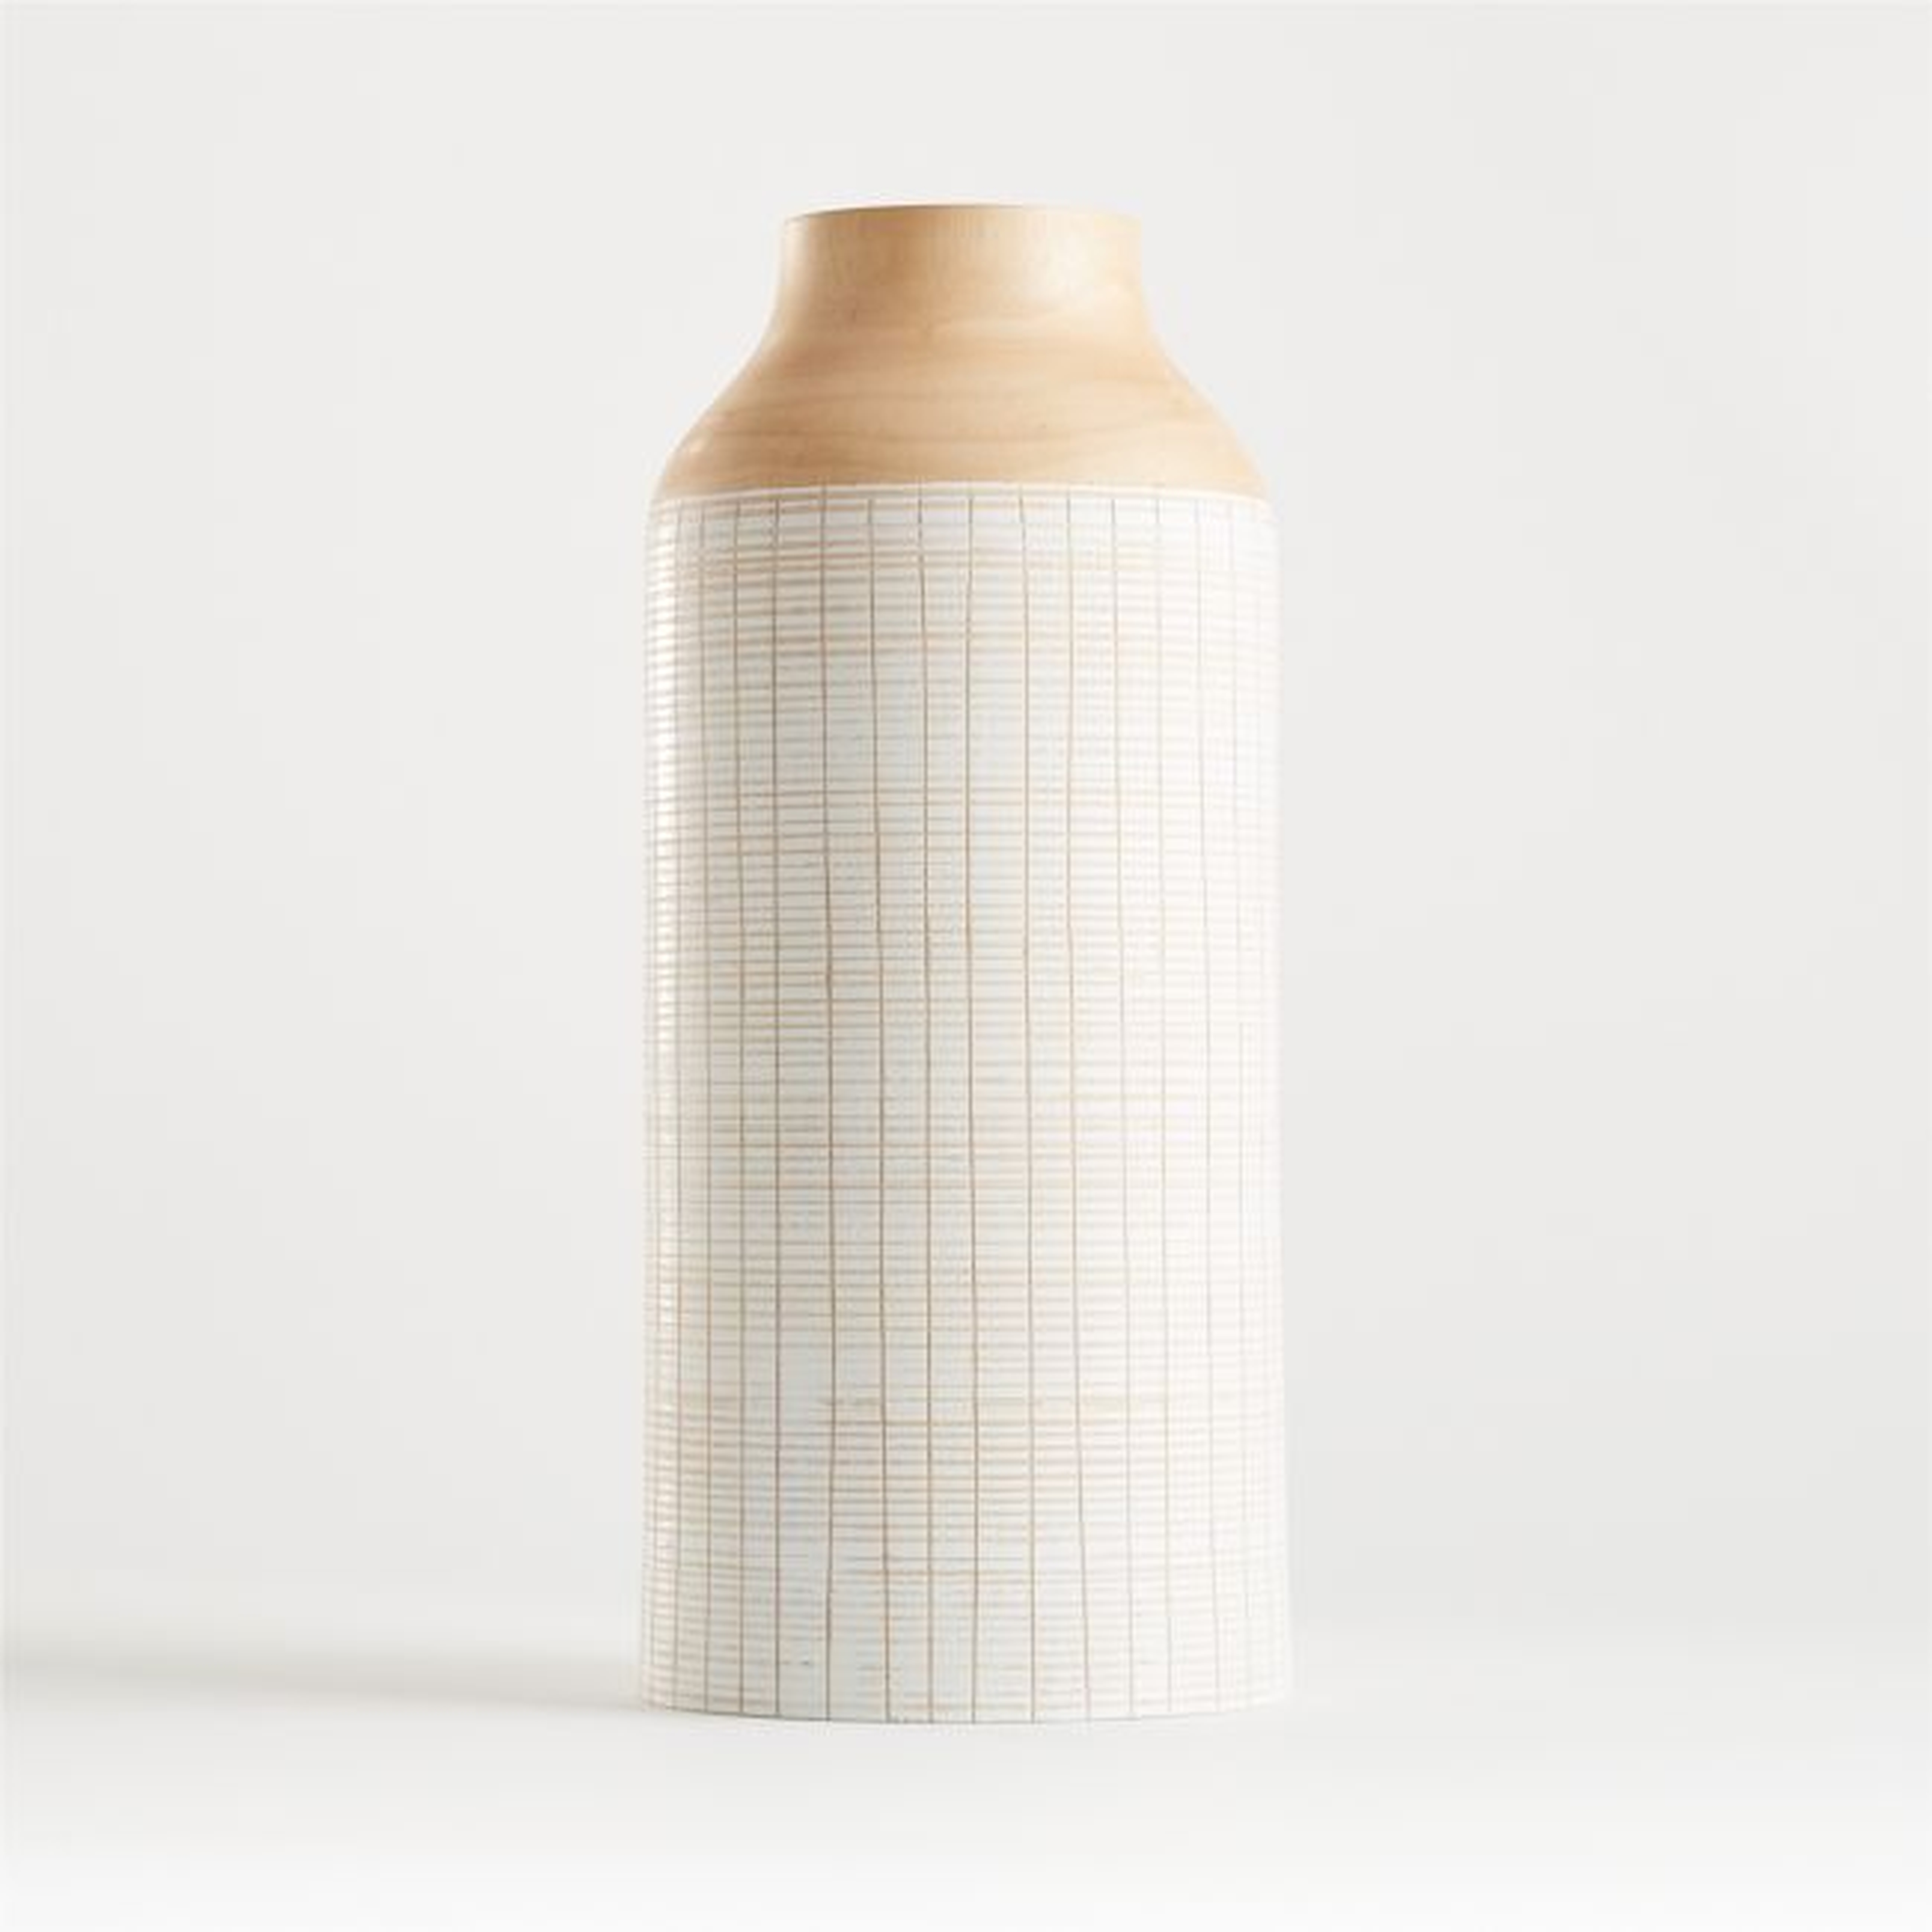 Soto White Wood Vase 16" - Crate and Barrel